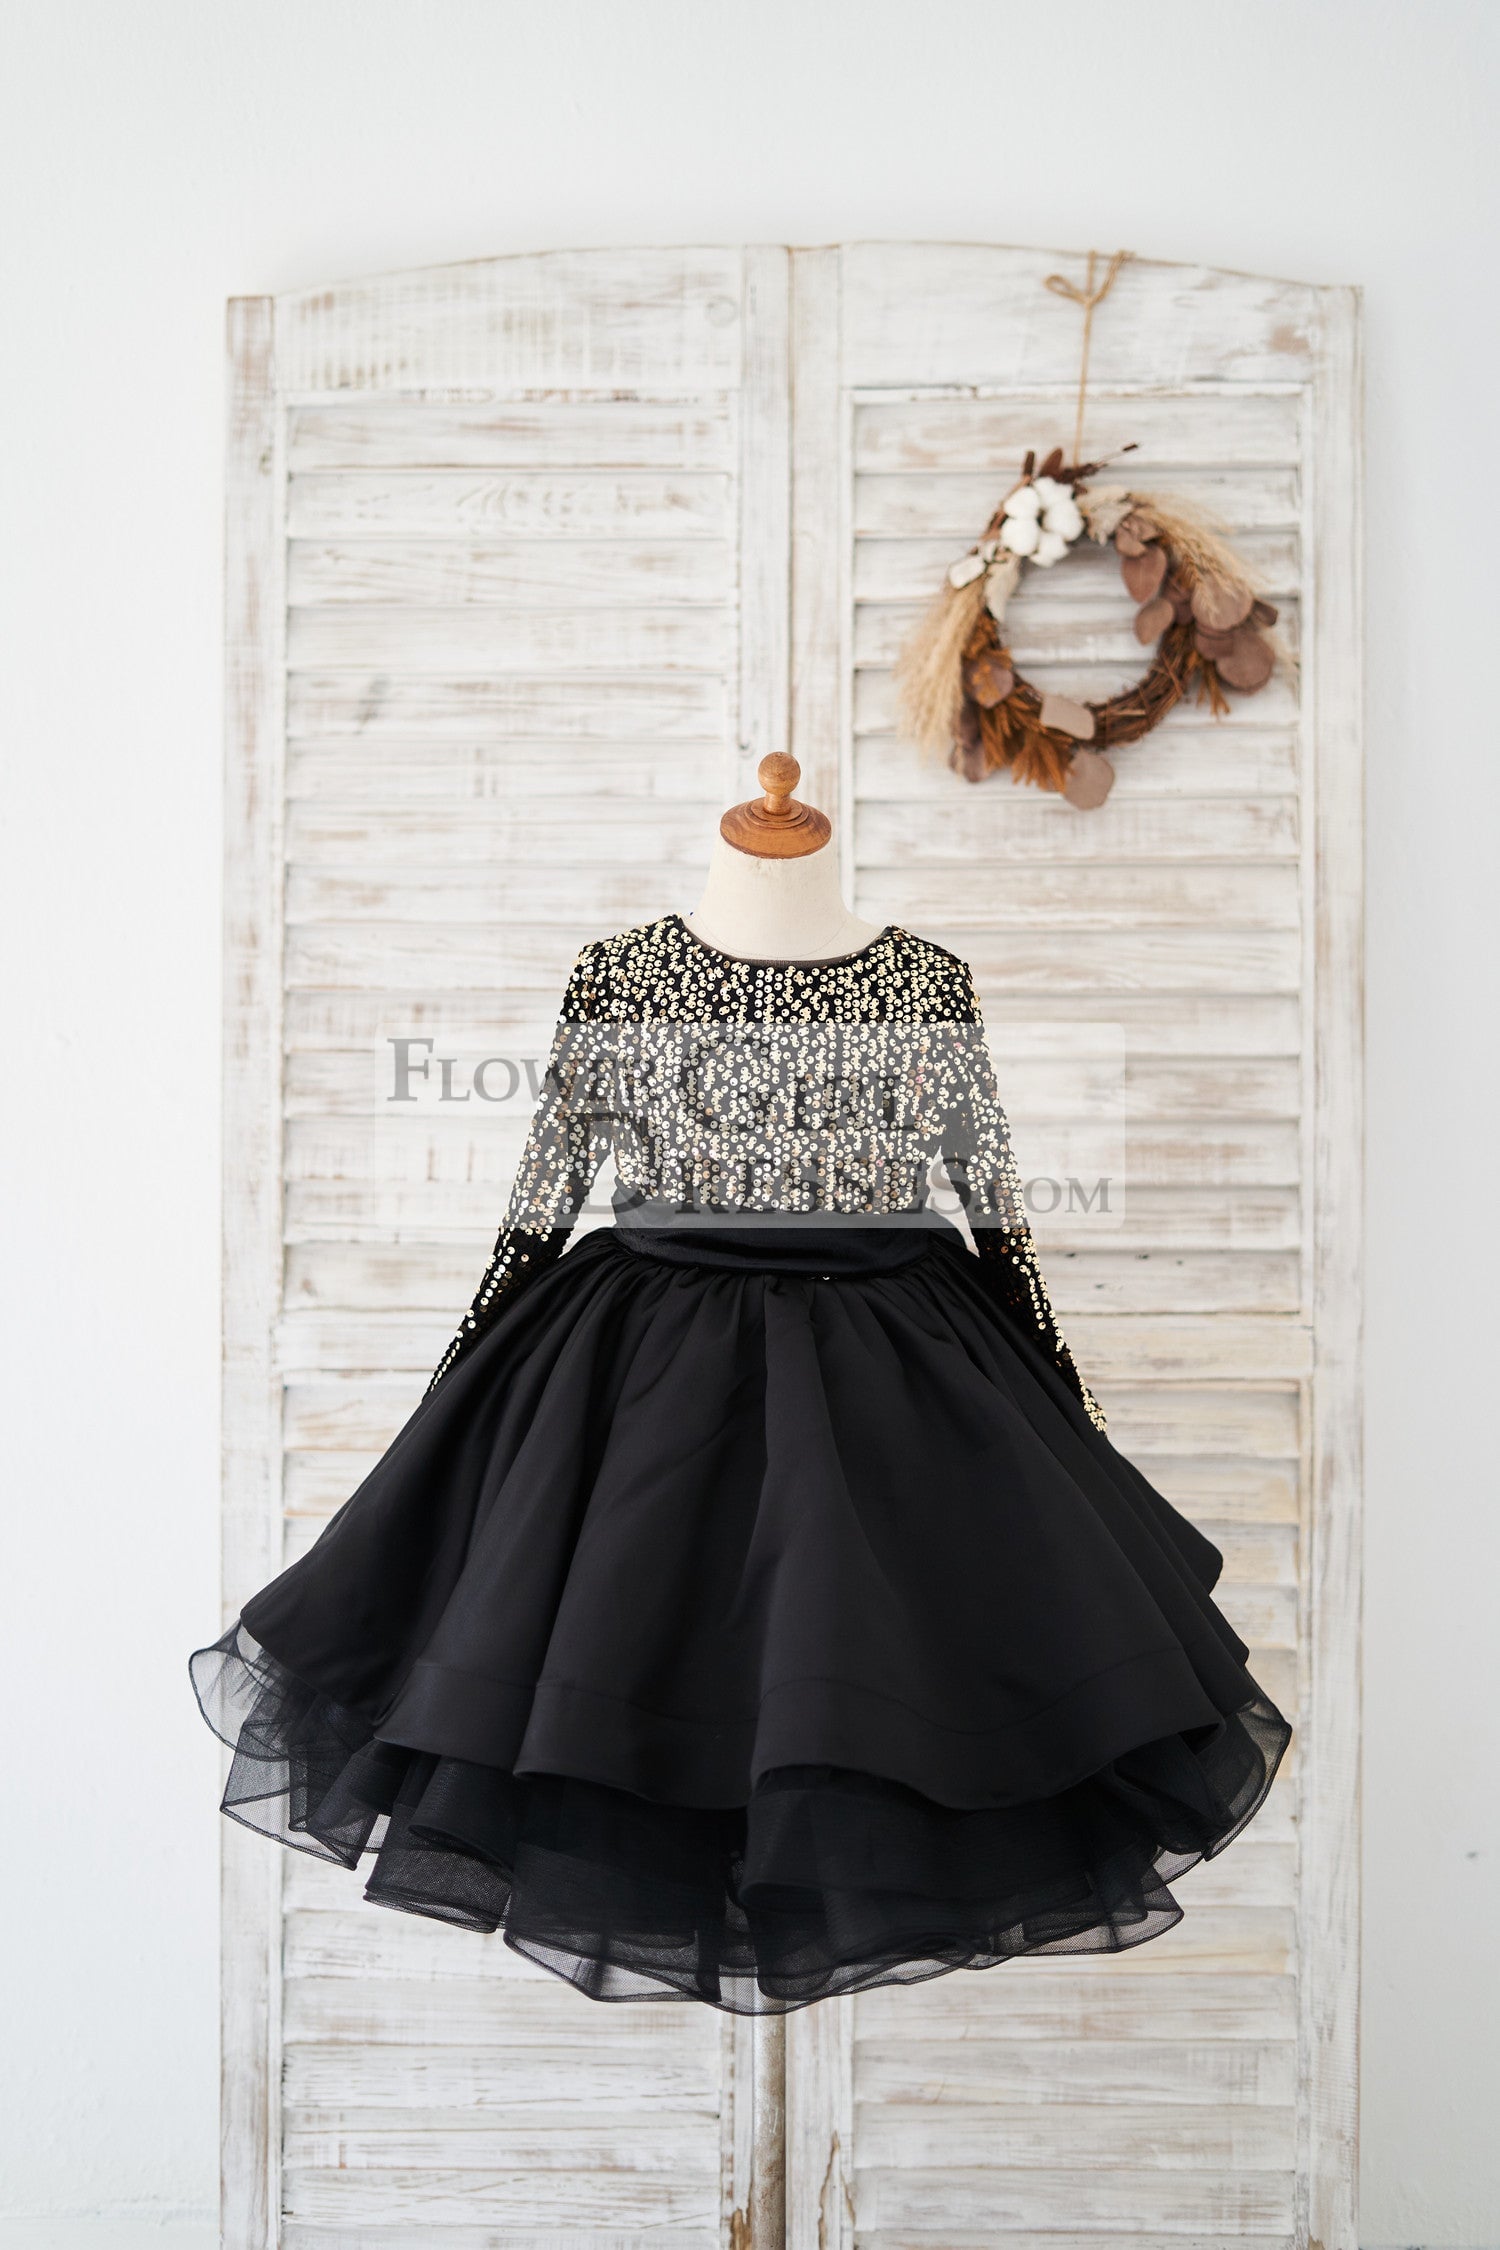 Buy Kids Dress Girls Long Dress in Black Color net and Cotton (12-13 Years)  at Amazon.in